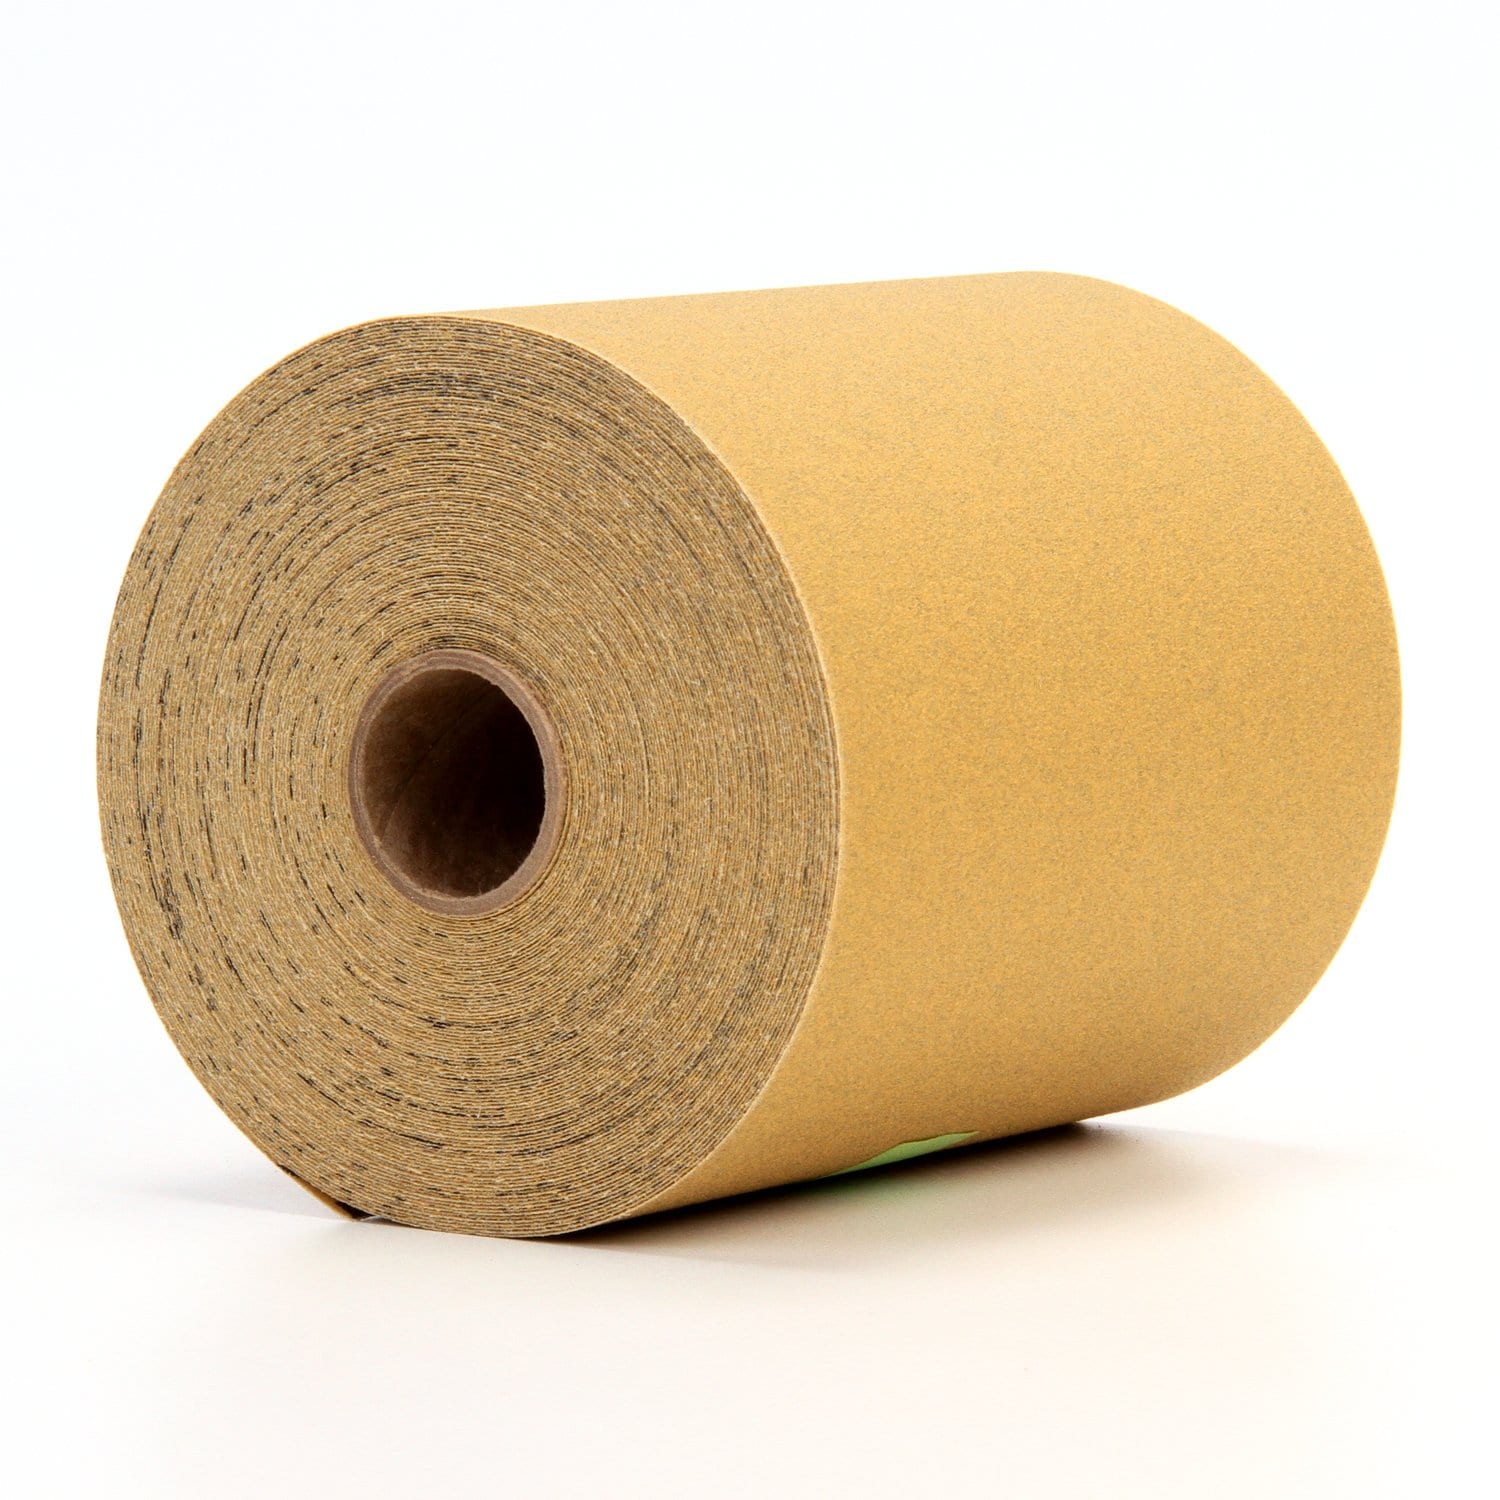 7100069999 - 3M Stikit Paper Roll 236U, P180 C-weight, Config